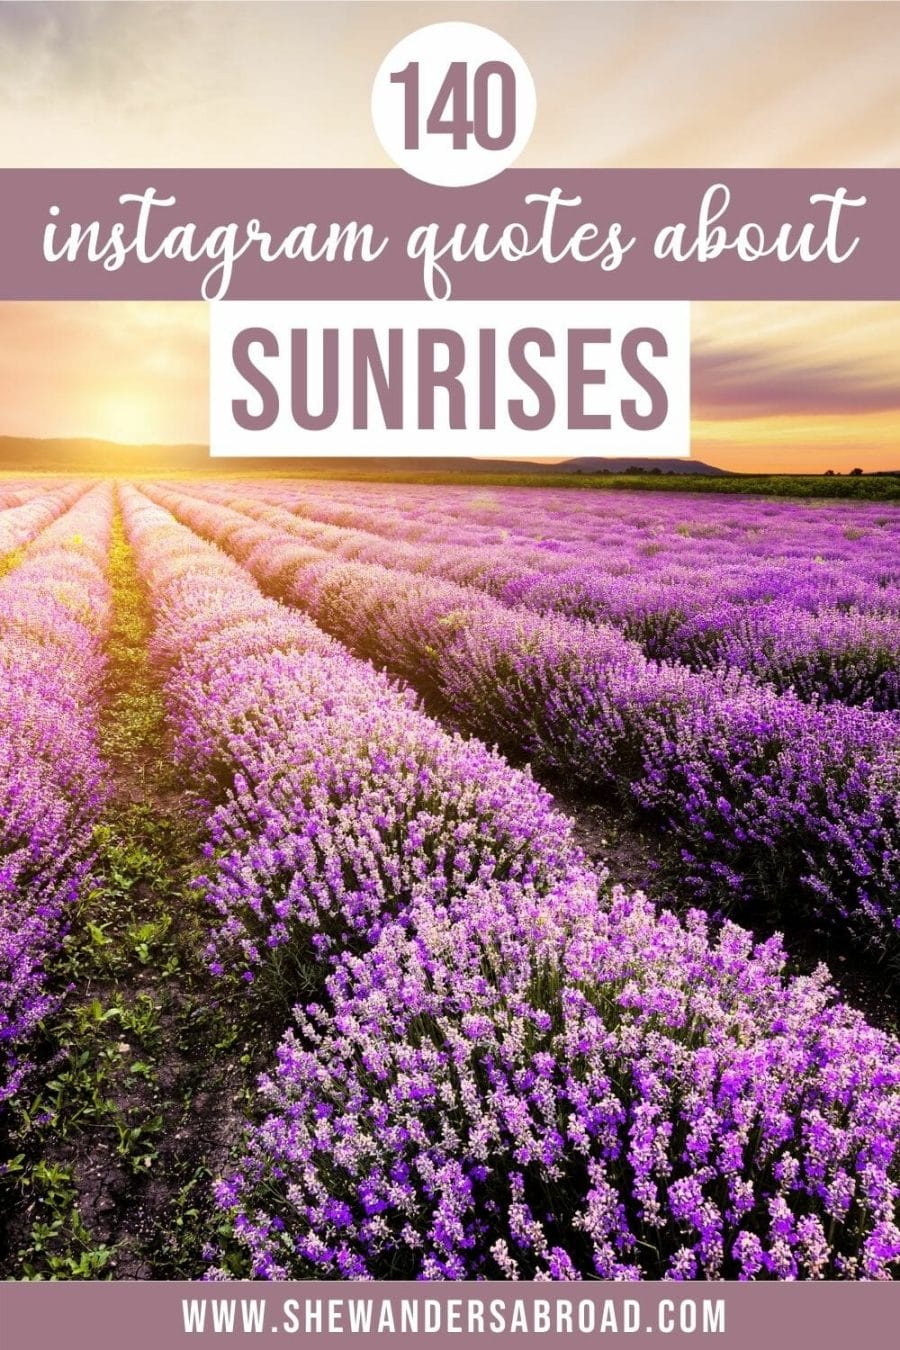 Incredible Sunrise Captions for Instagram